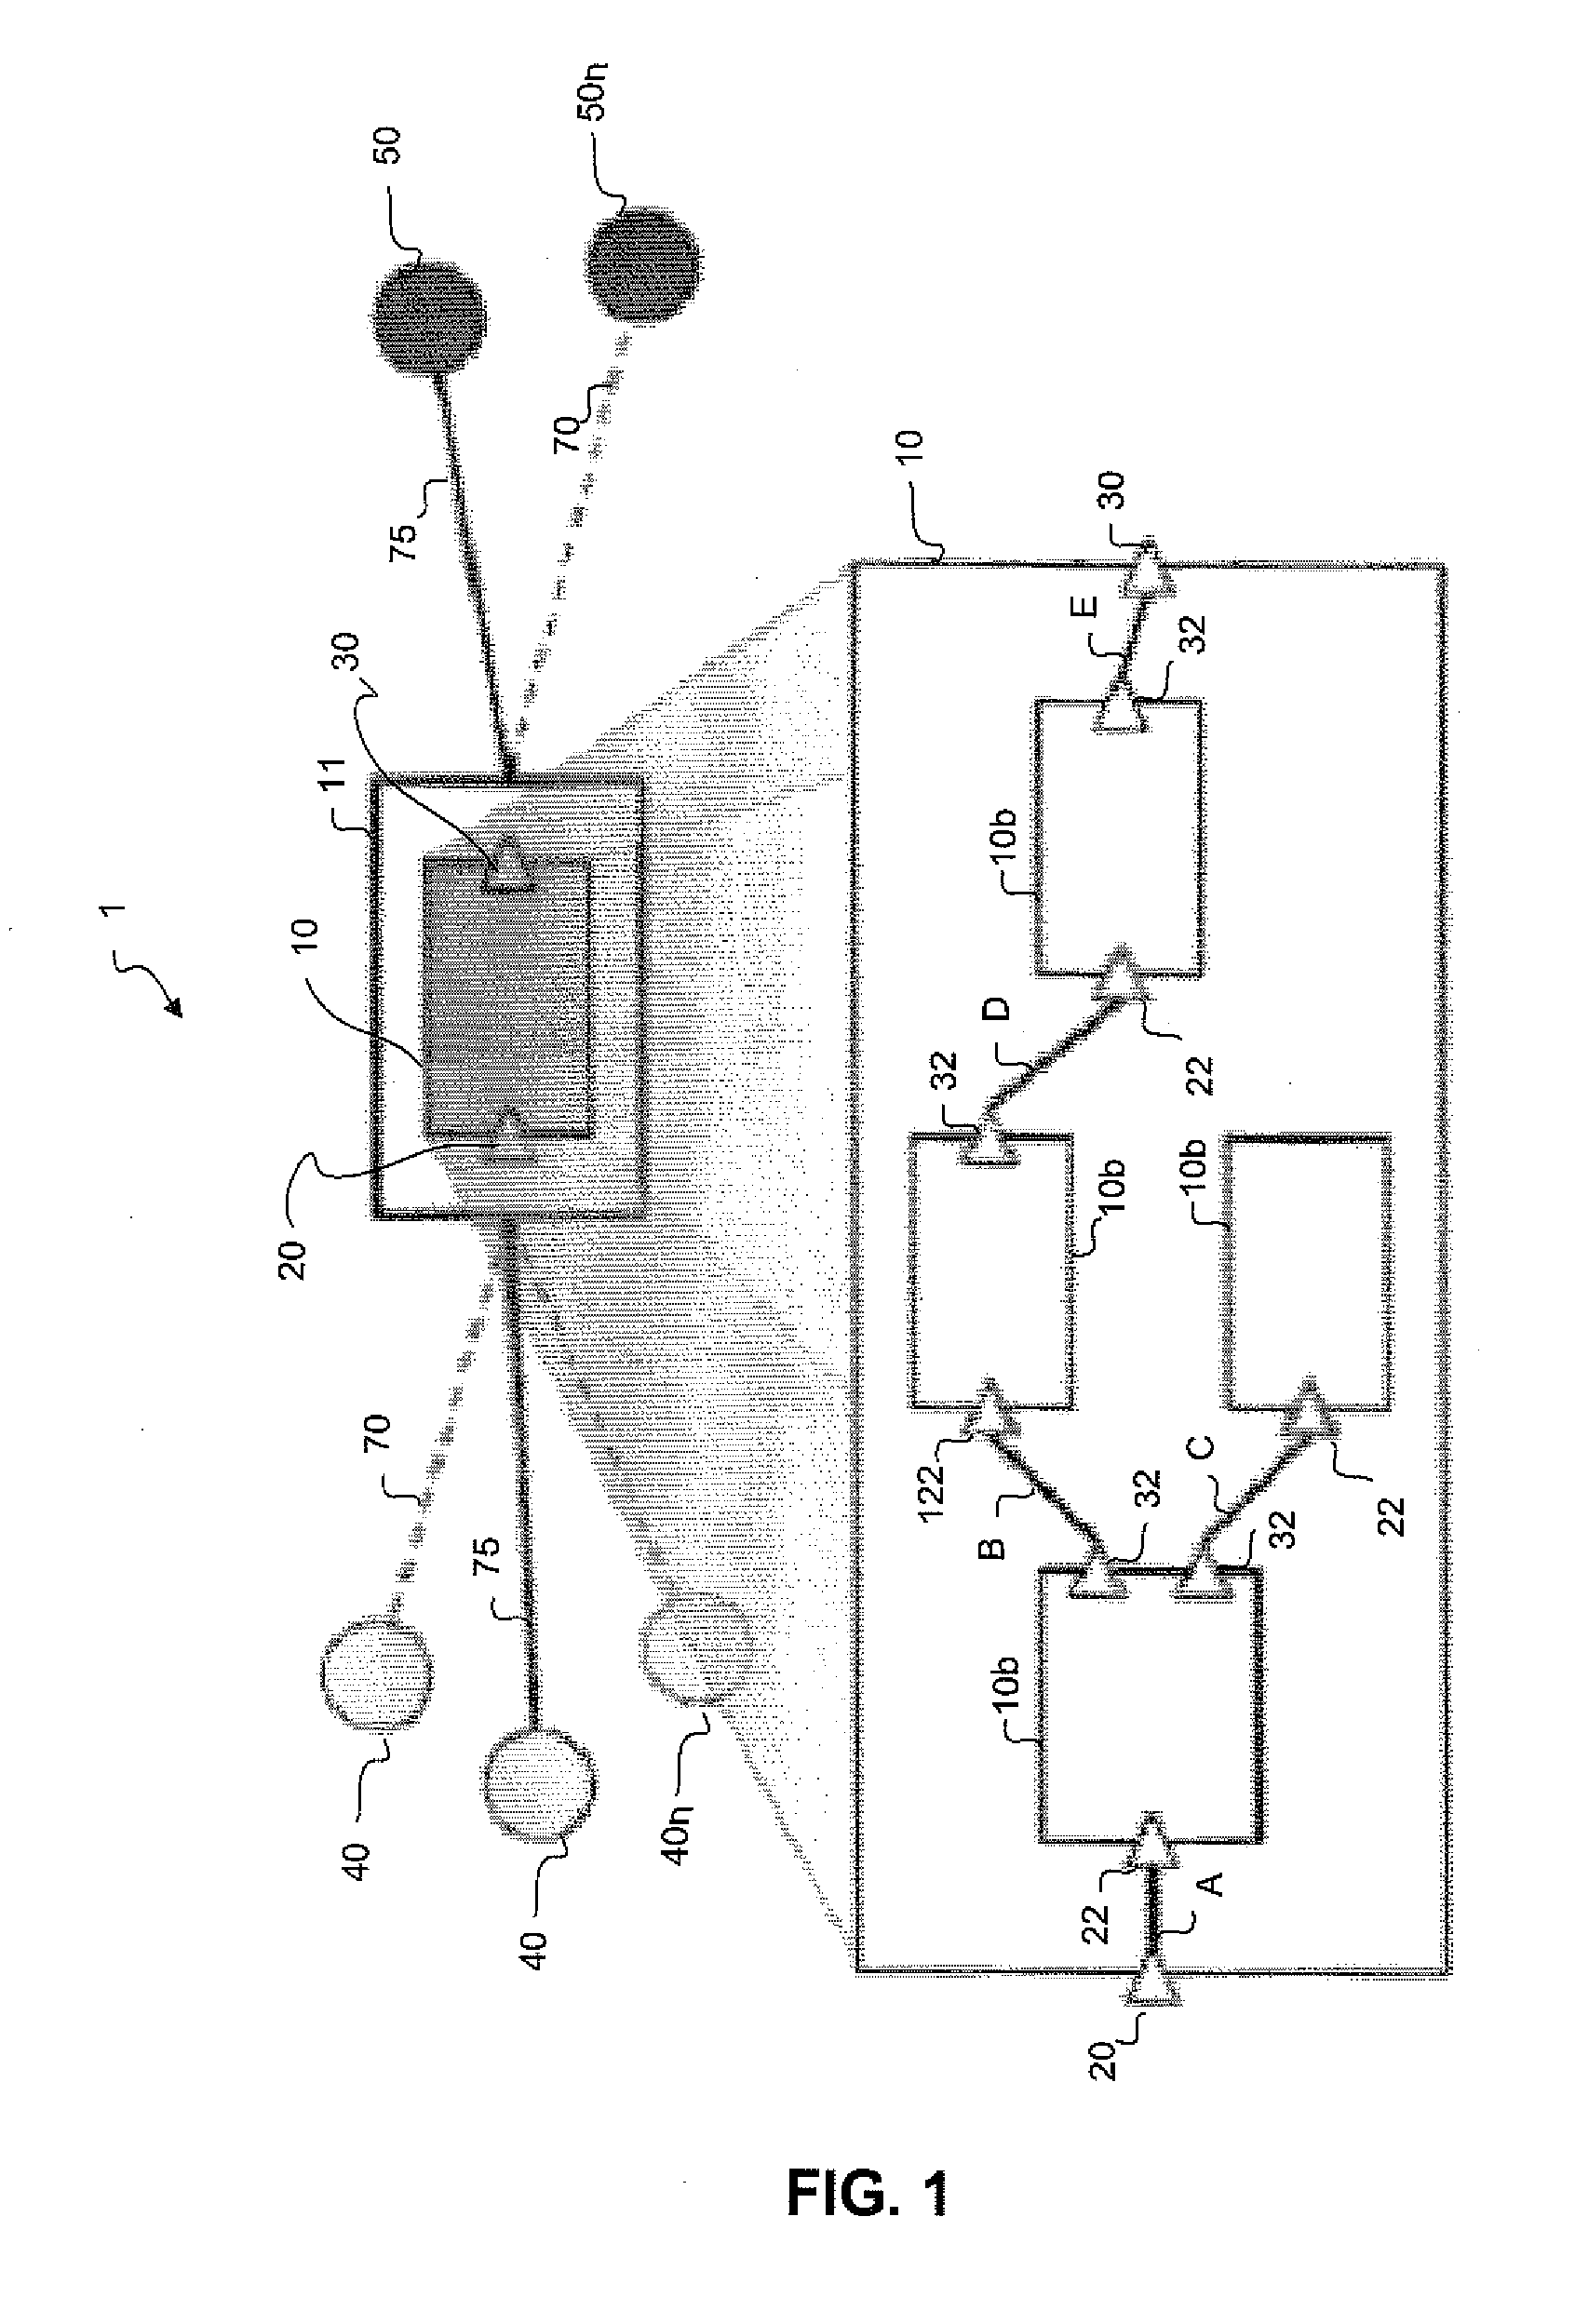 System and method for developing and deploying sensor and actuator applications over distributed computing infrastructure